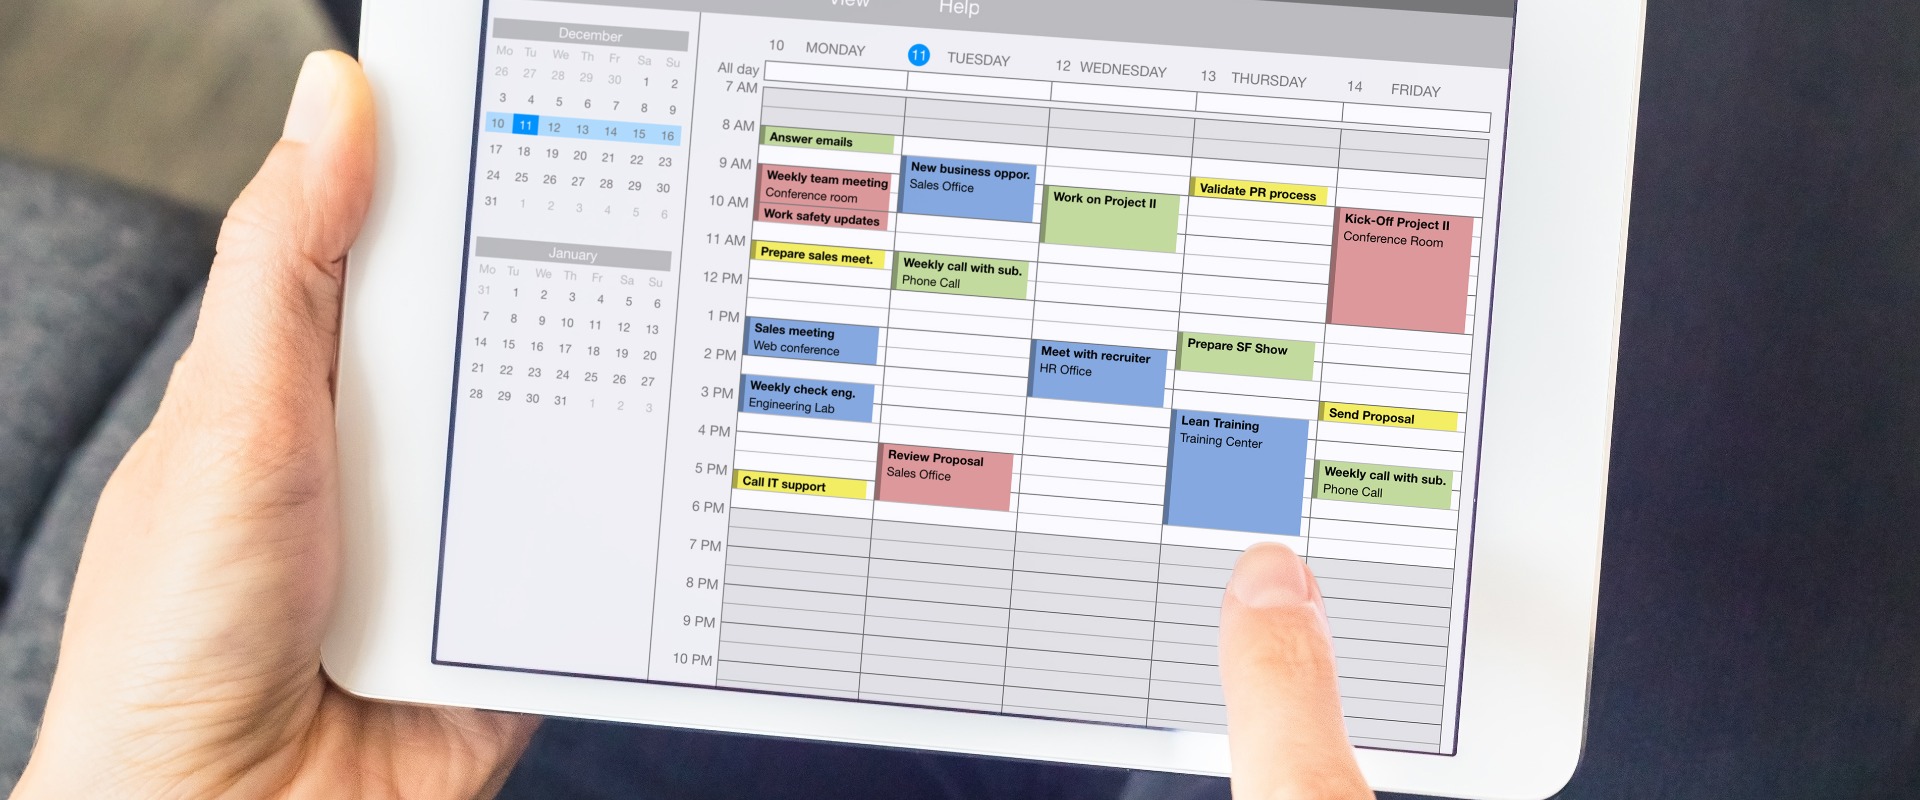 Calendar app on tablet computer with planning of the week with appointments, events, tasks, and meeting. Hands holding device, time management concept, organization of working hours planner, schedule